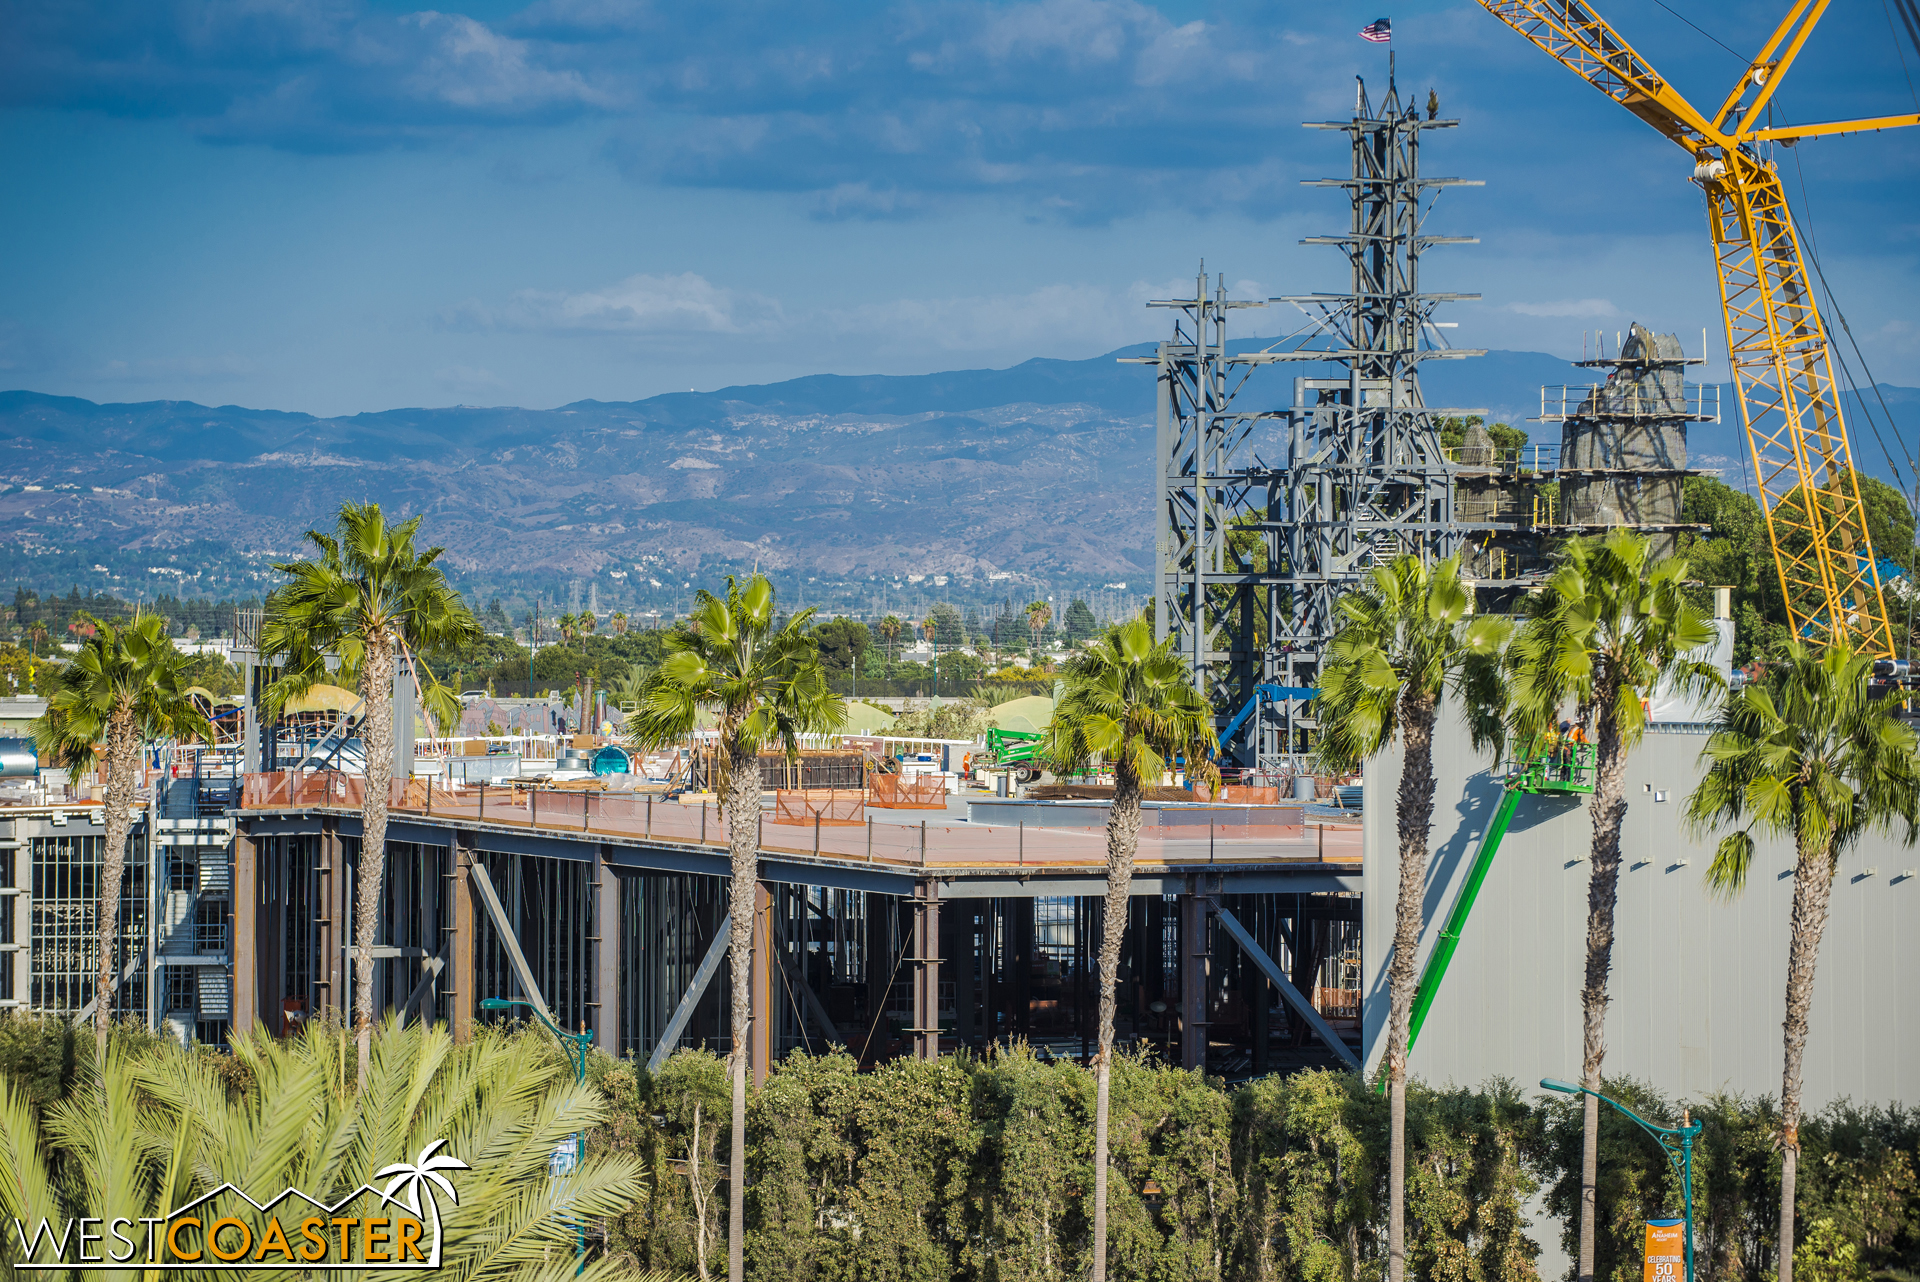  The Millennium Falcon building has been humming along too. &nbsp;It's much harder to see it, since the angle is oblique, but just the density of what's inside shows they've been putting up walls and steel. 